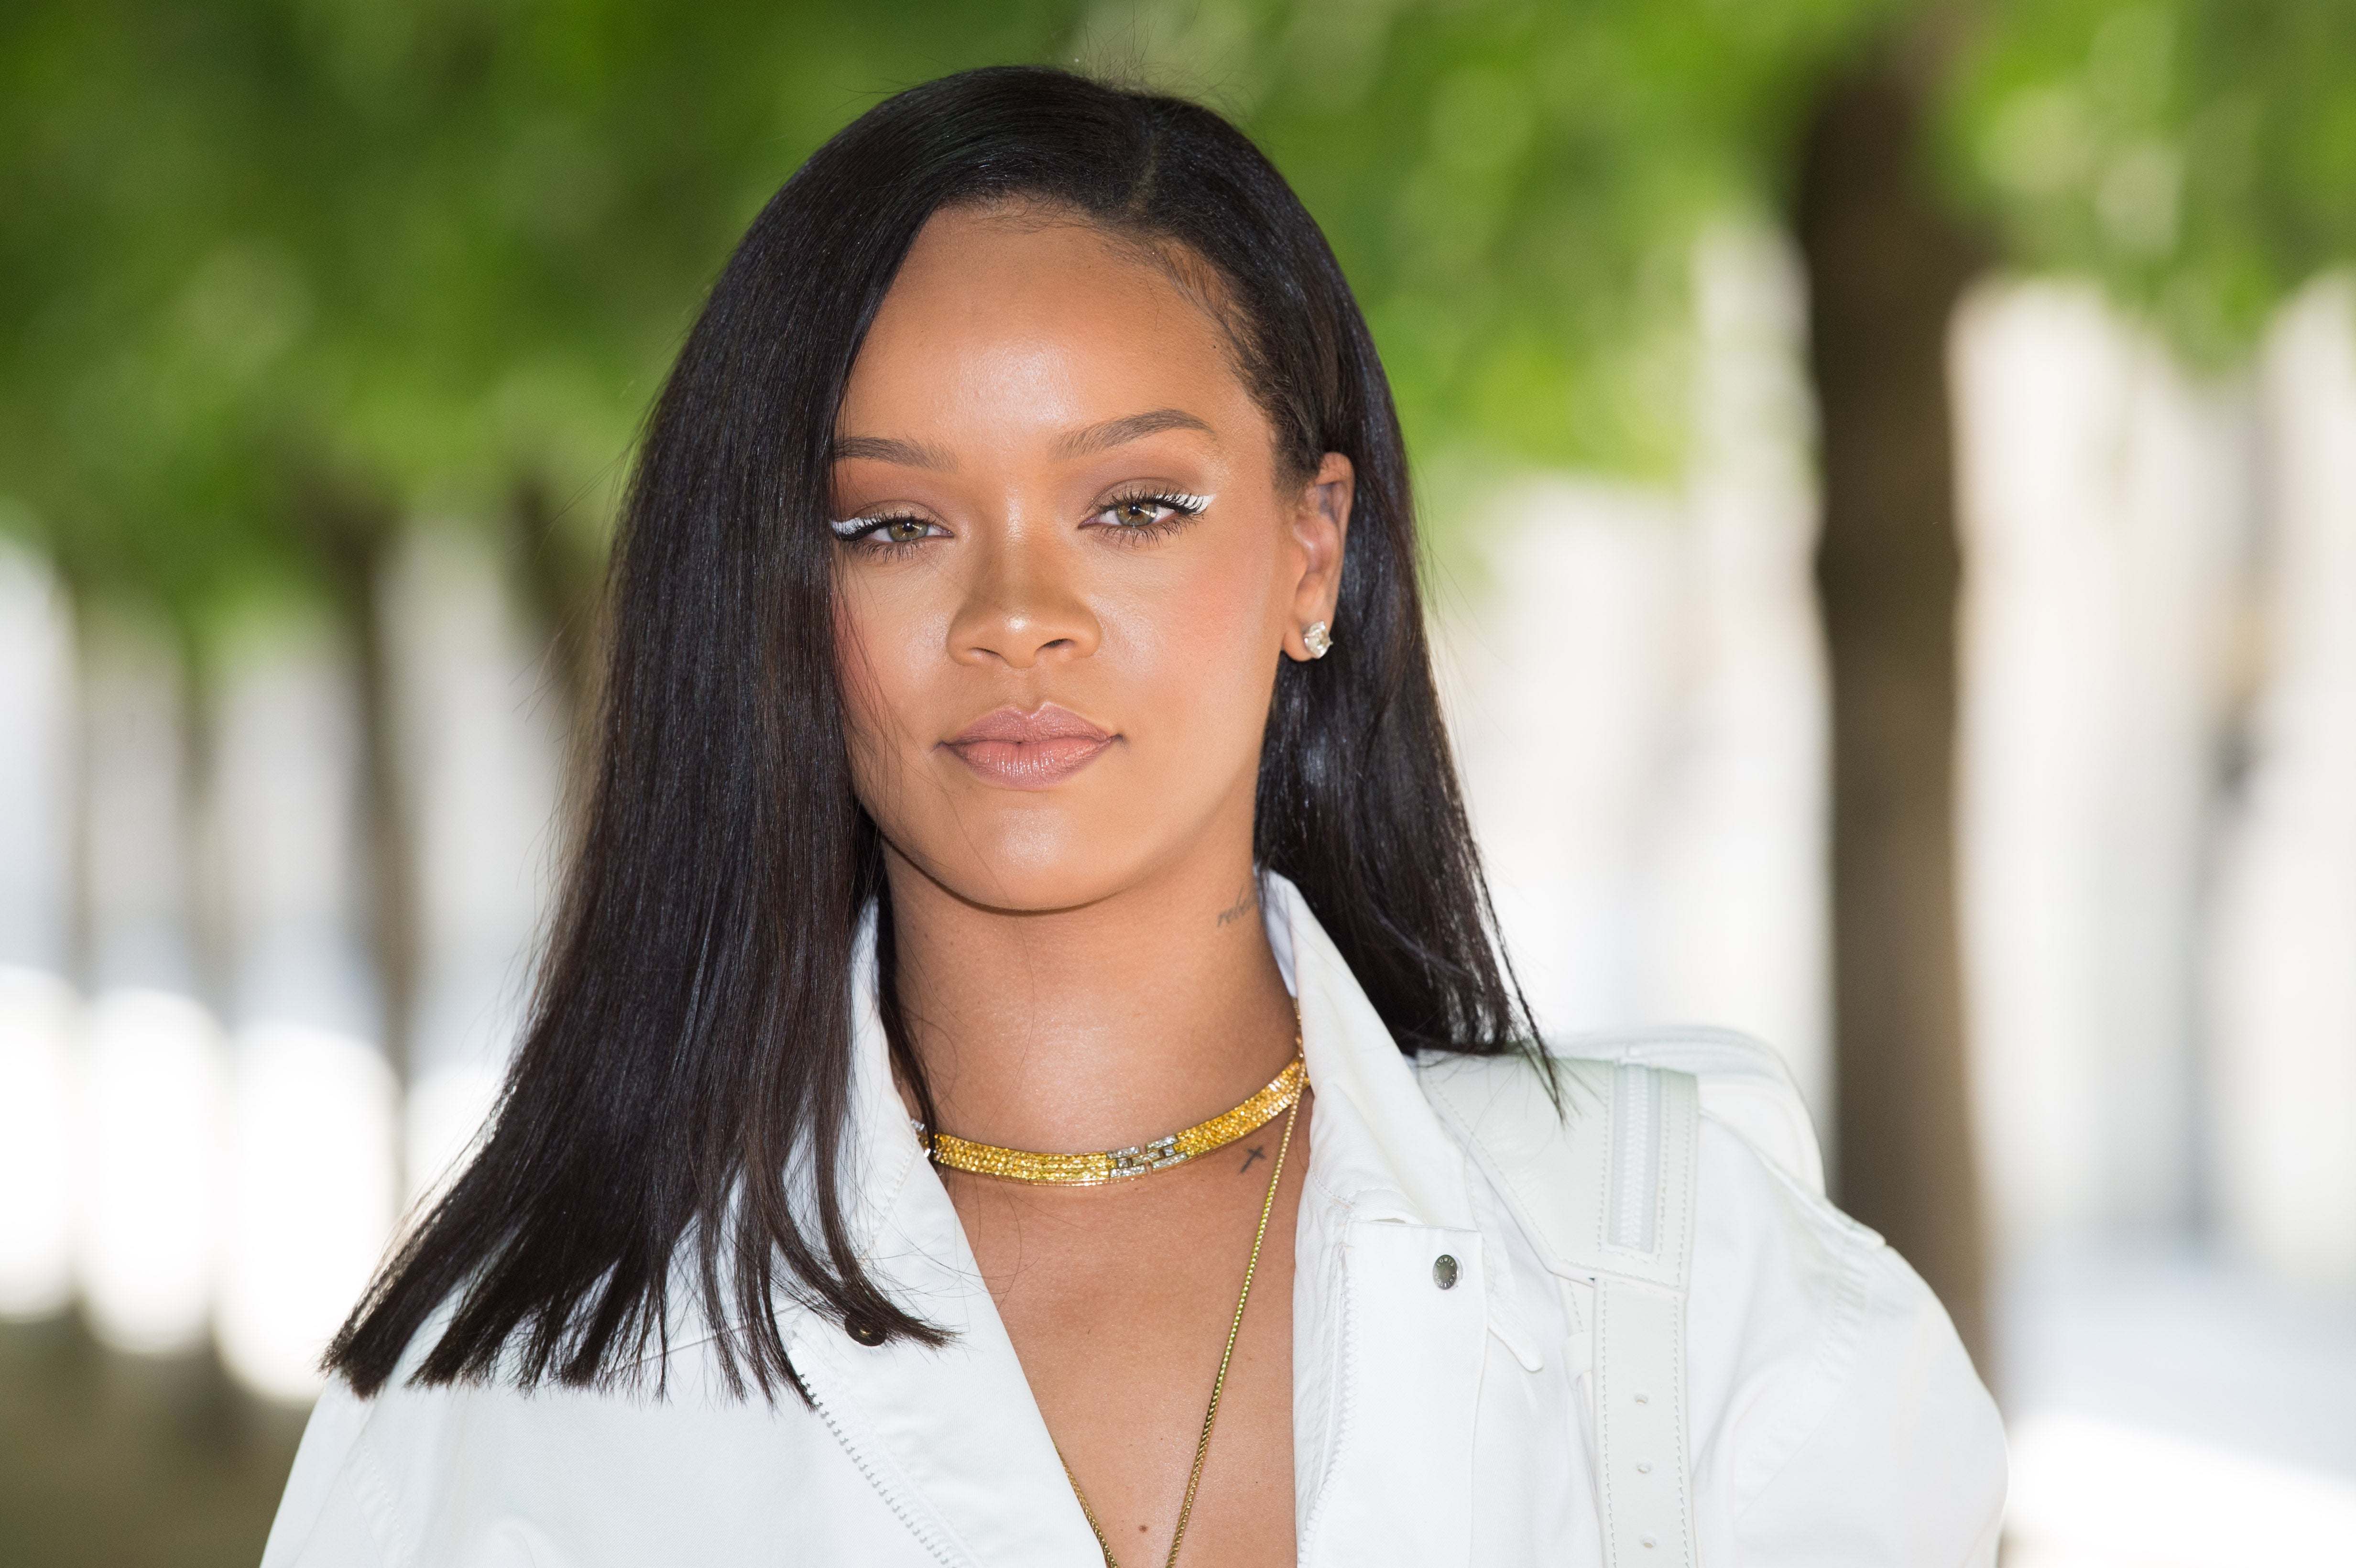 Rihanna Keeps Her Edges Slick With This $6 Drugstore Product